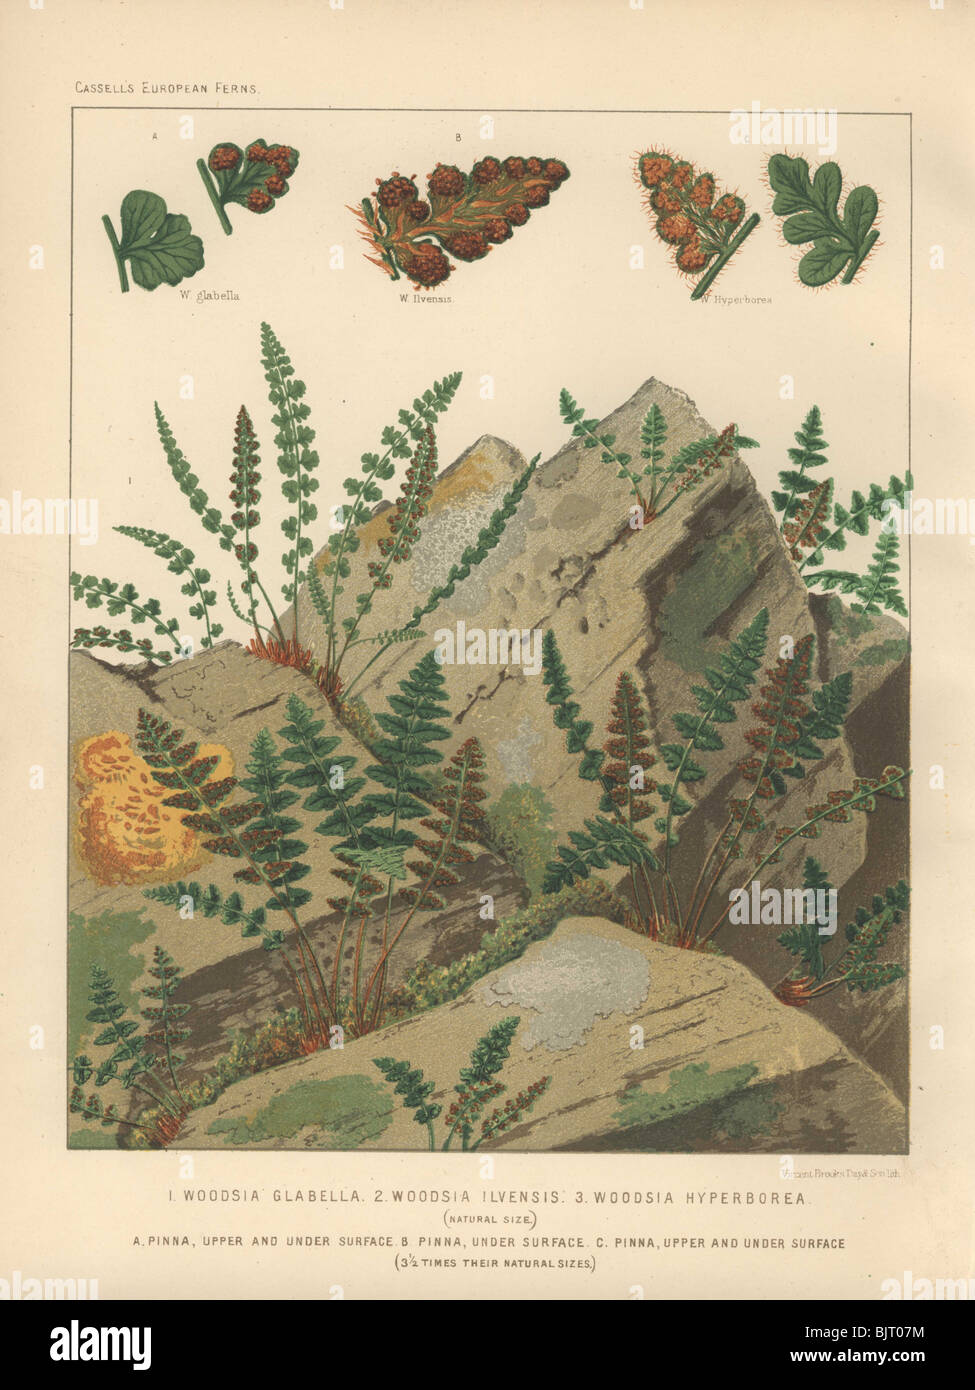 Three varieties of the small cliff ferns (Woodsia) shown growing out of rocky ground. W. glabella, W. ilvensis, W. hyperborea Stock Photo